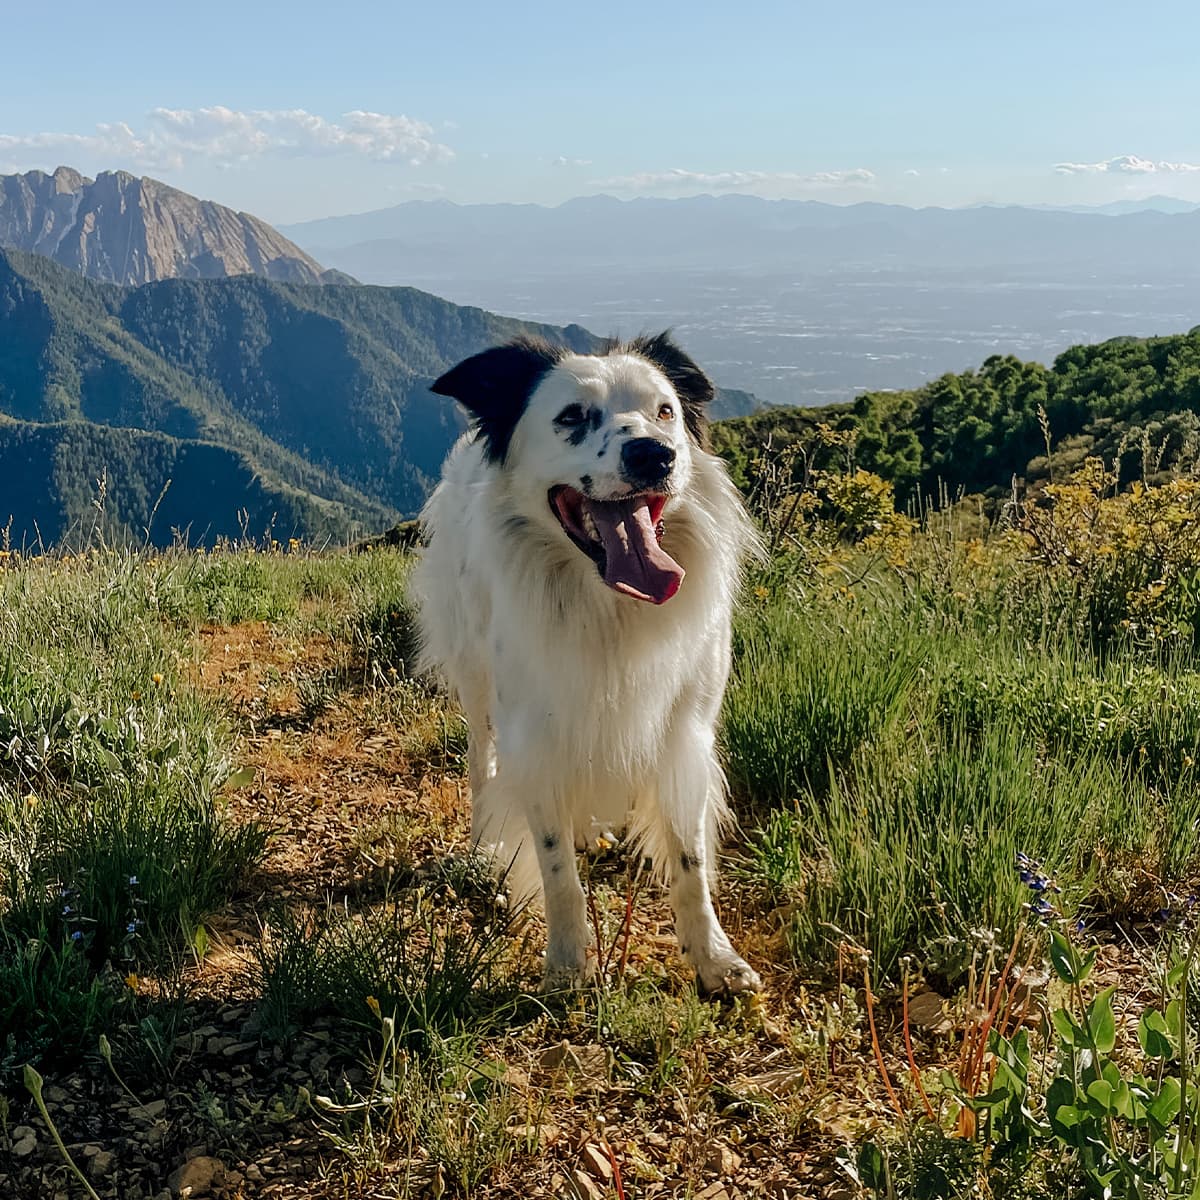 Border collie standing on a grassy mountain with a valley and more mountains in the background